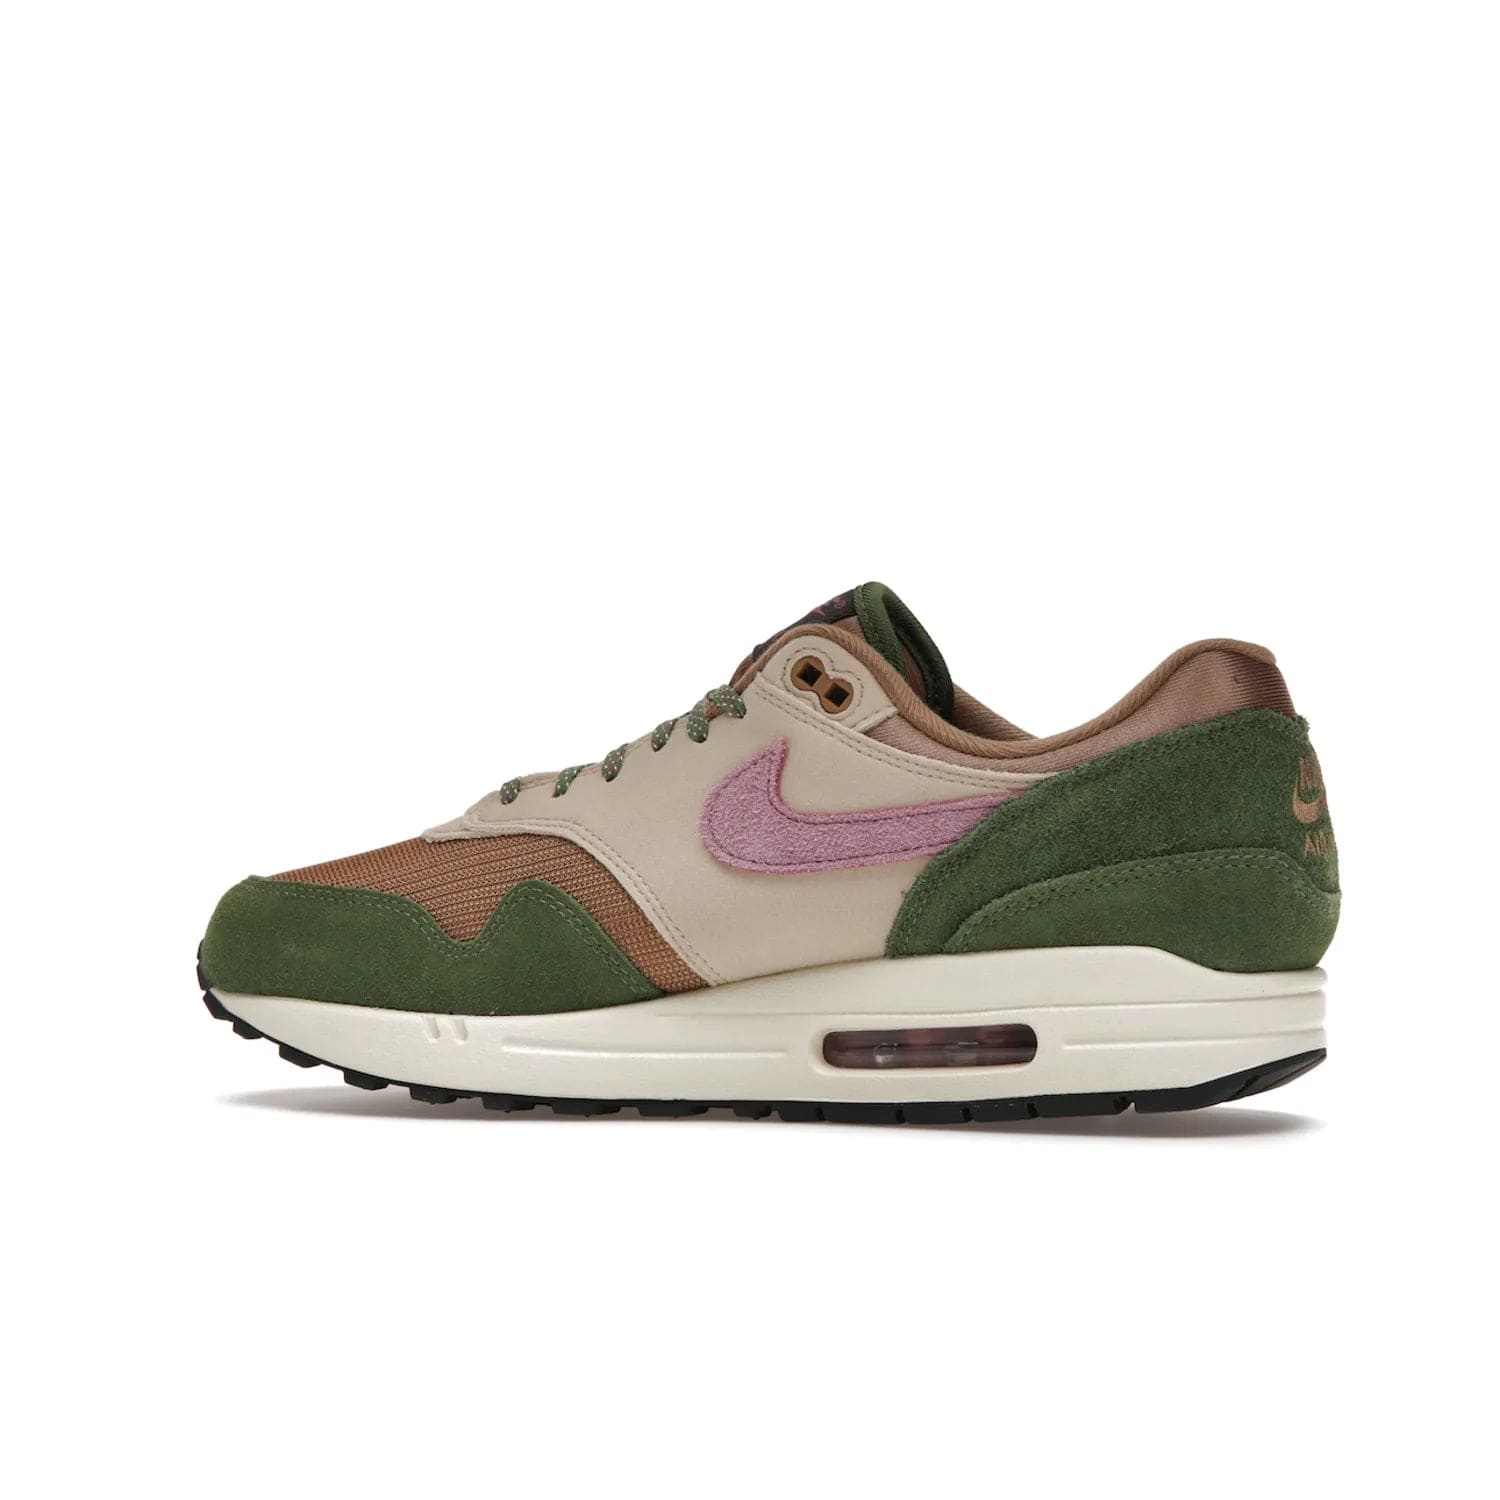 Nike Air Max 1 SH Treeline - Image 21 - Only at www.BallersClubKickz.com - A classic Nike Air Max 1 SH Treeline with a brown mesh upper, taupe Durabuck overlays, and hairy green suede details. Light Bordeaux Swoosh and woven tongue label for a pop of color. Released in May 2022. Perfect for any outfit and sure to impress.